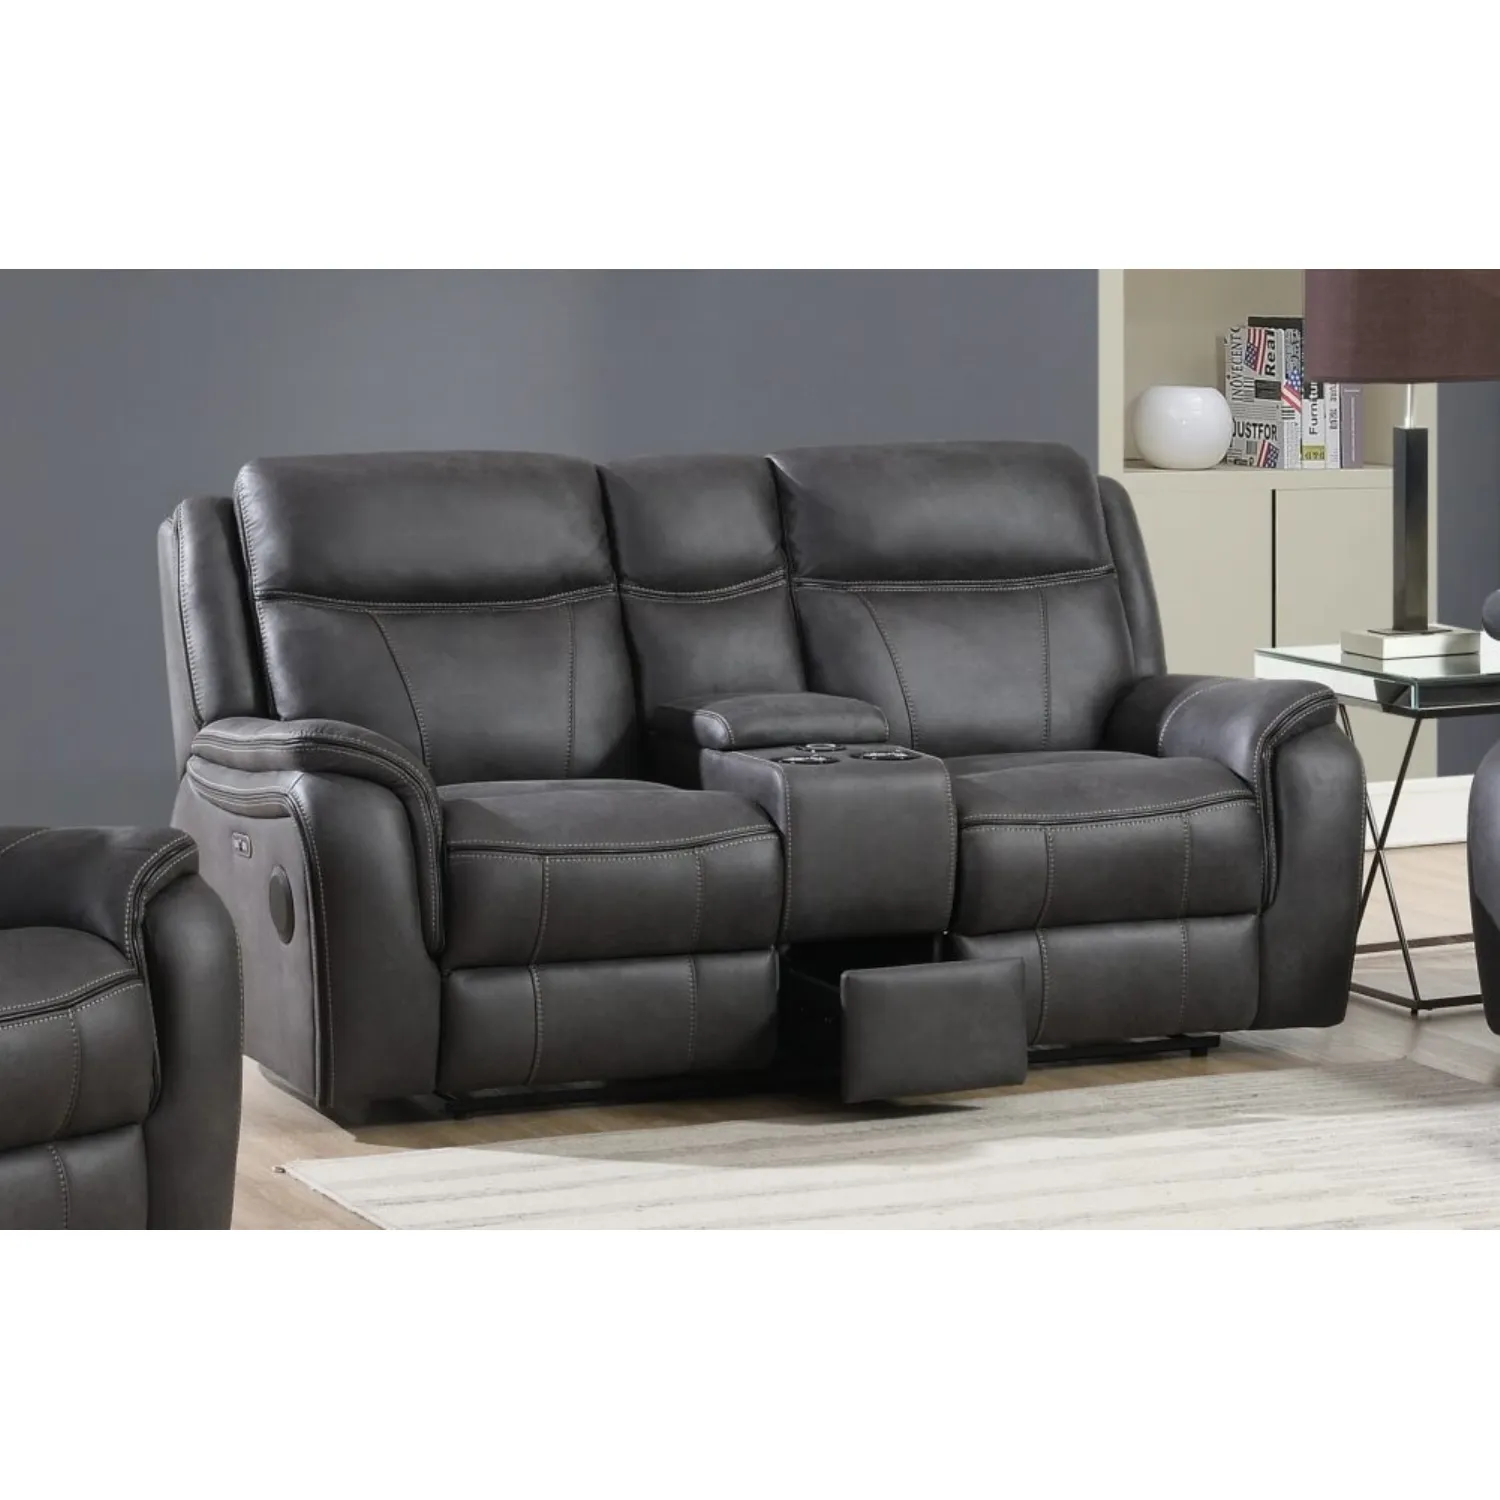 Charcoal Fabric Electric Reclining 3 Seater Sofa